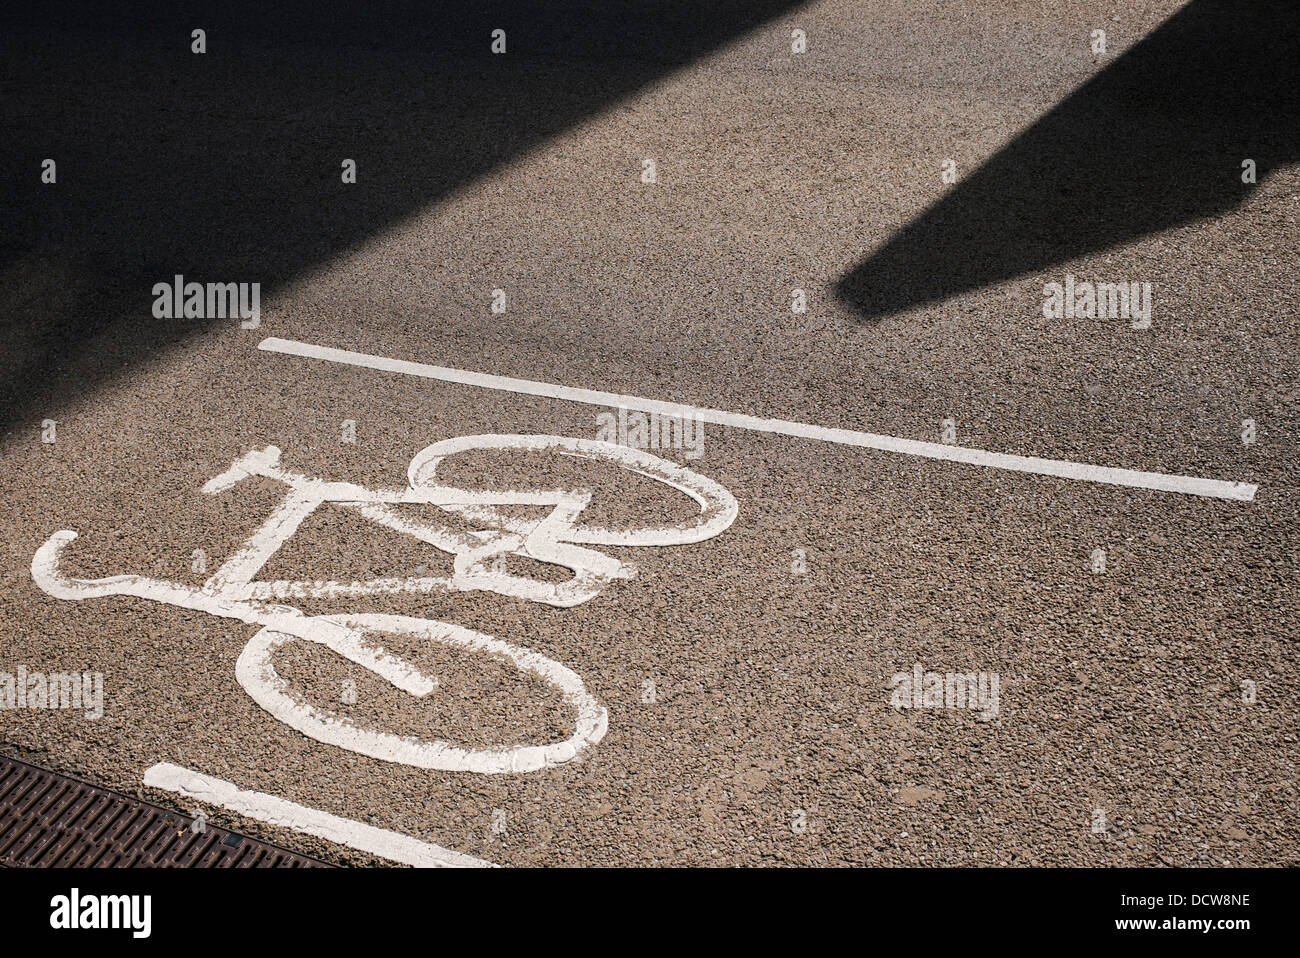 Painted Cycle lane road sign. England Stock Photo